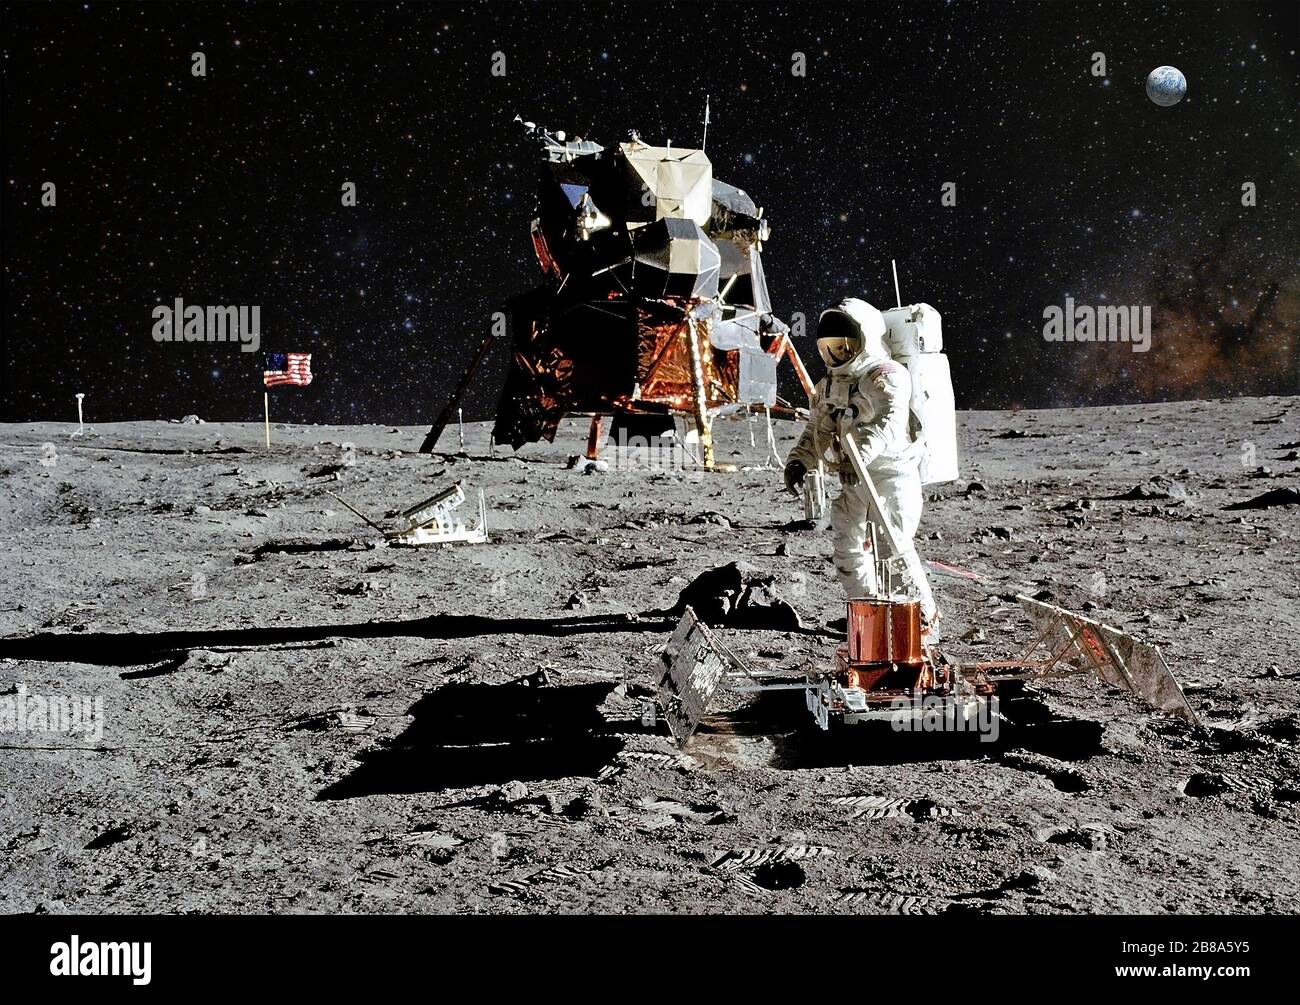 Astronaut on lunar (moon) landing mission. Elements of this image furnished by NASA. Stock Photo